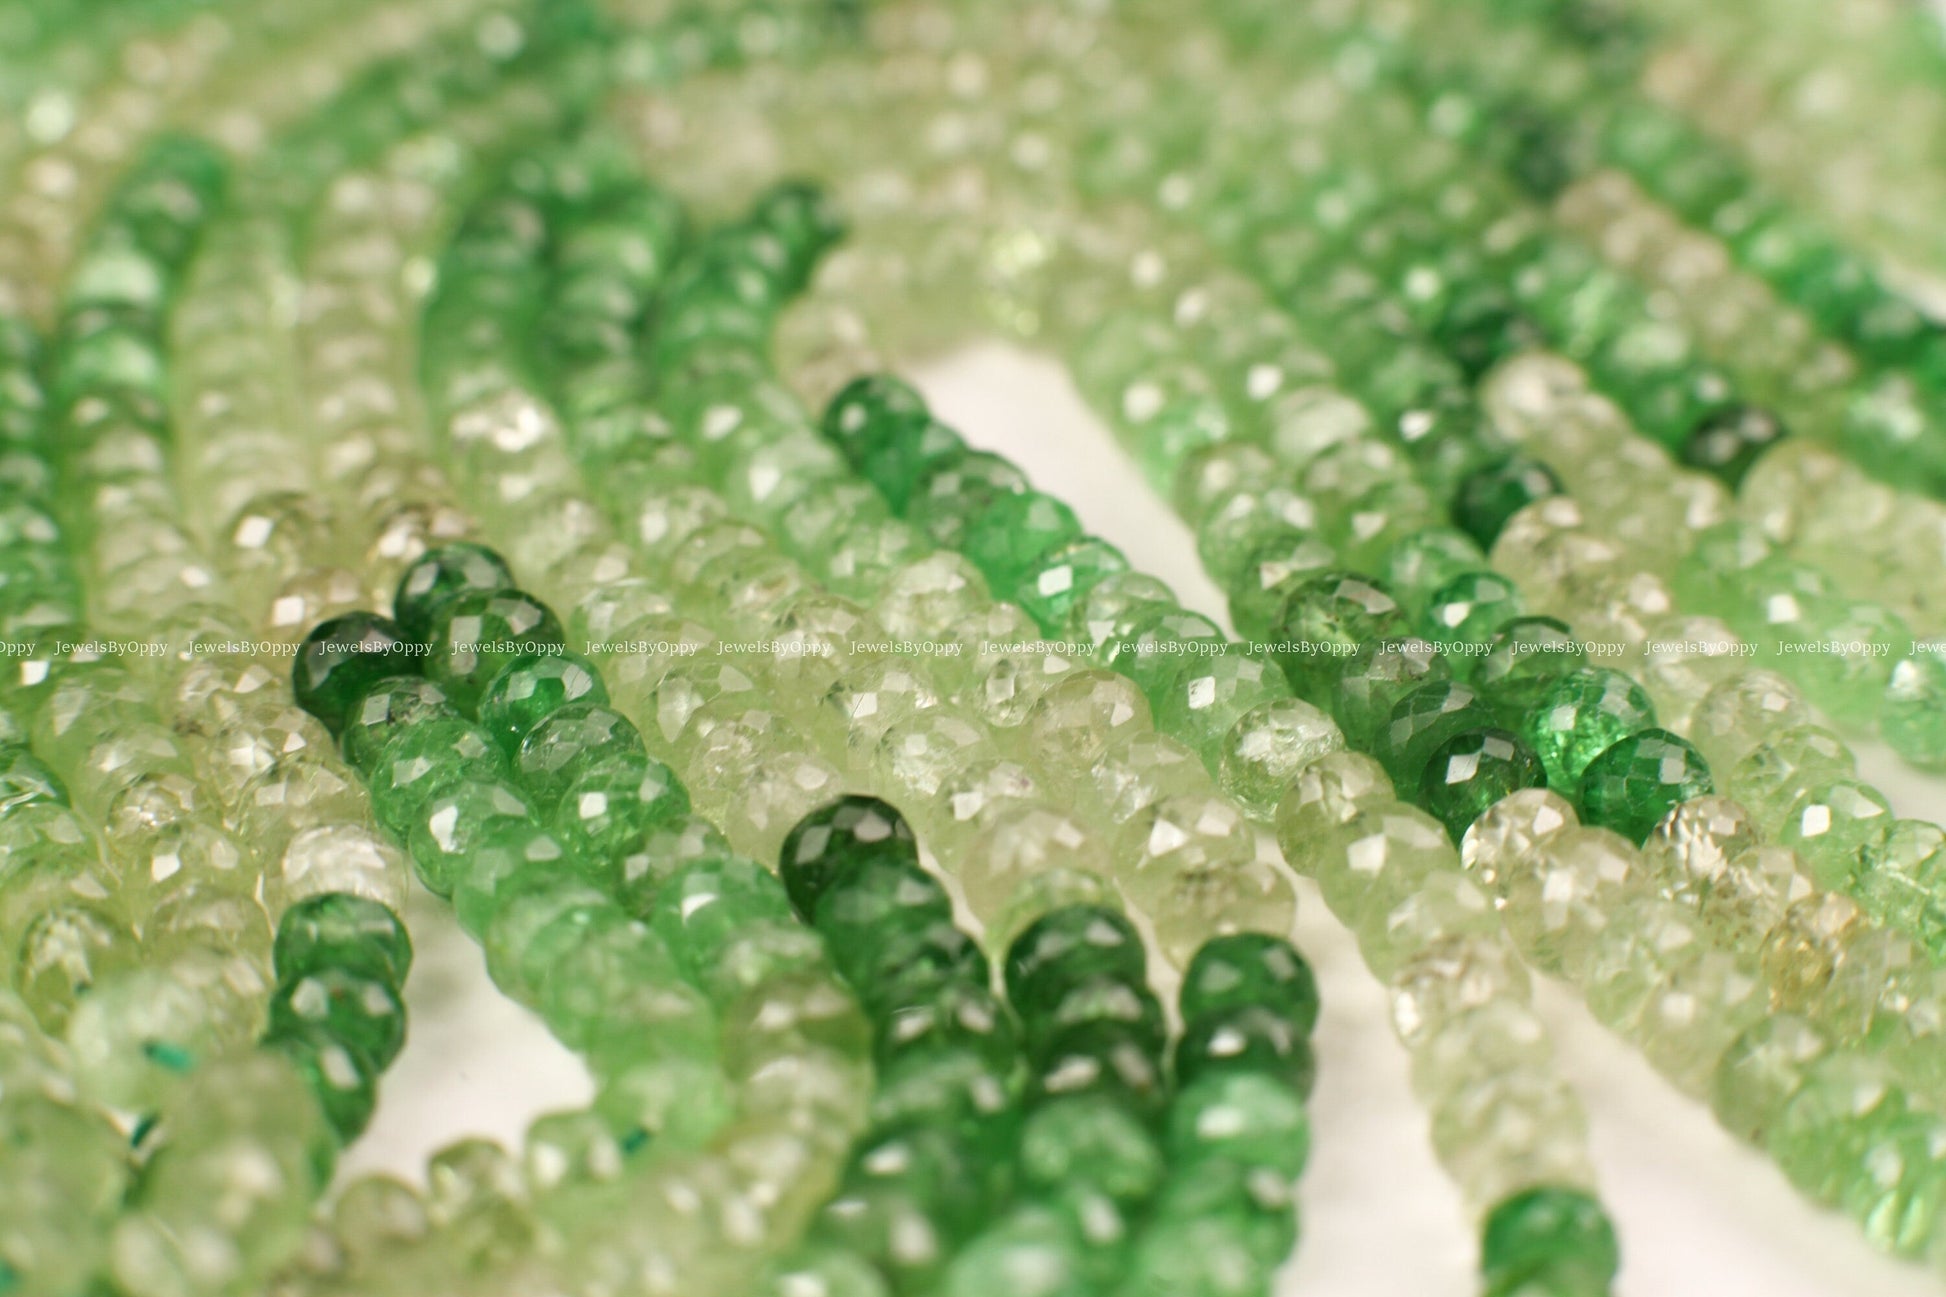 Natural Tsavorite shaded Micro Faceted Rondelle 5-5.5mm AAA clear quality, rare Tsavorite , Jewelry making beads. 7&quot; & 14&quot; strand